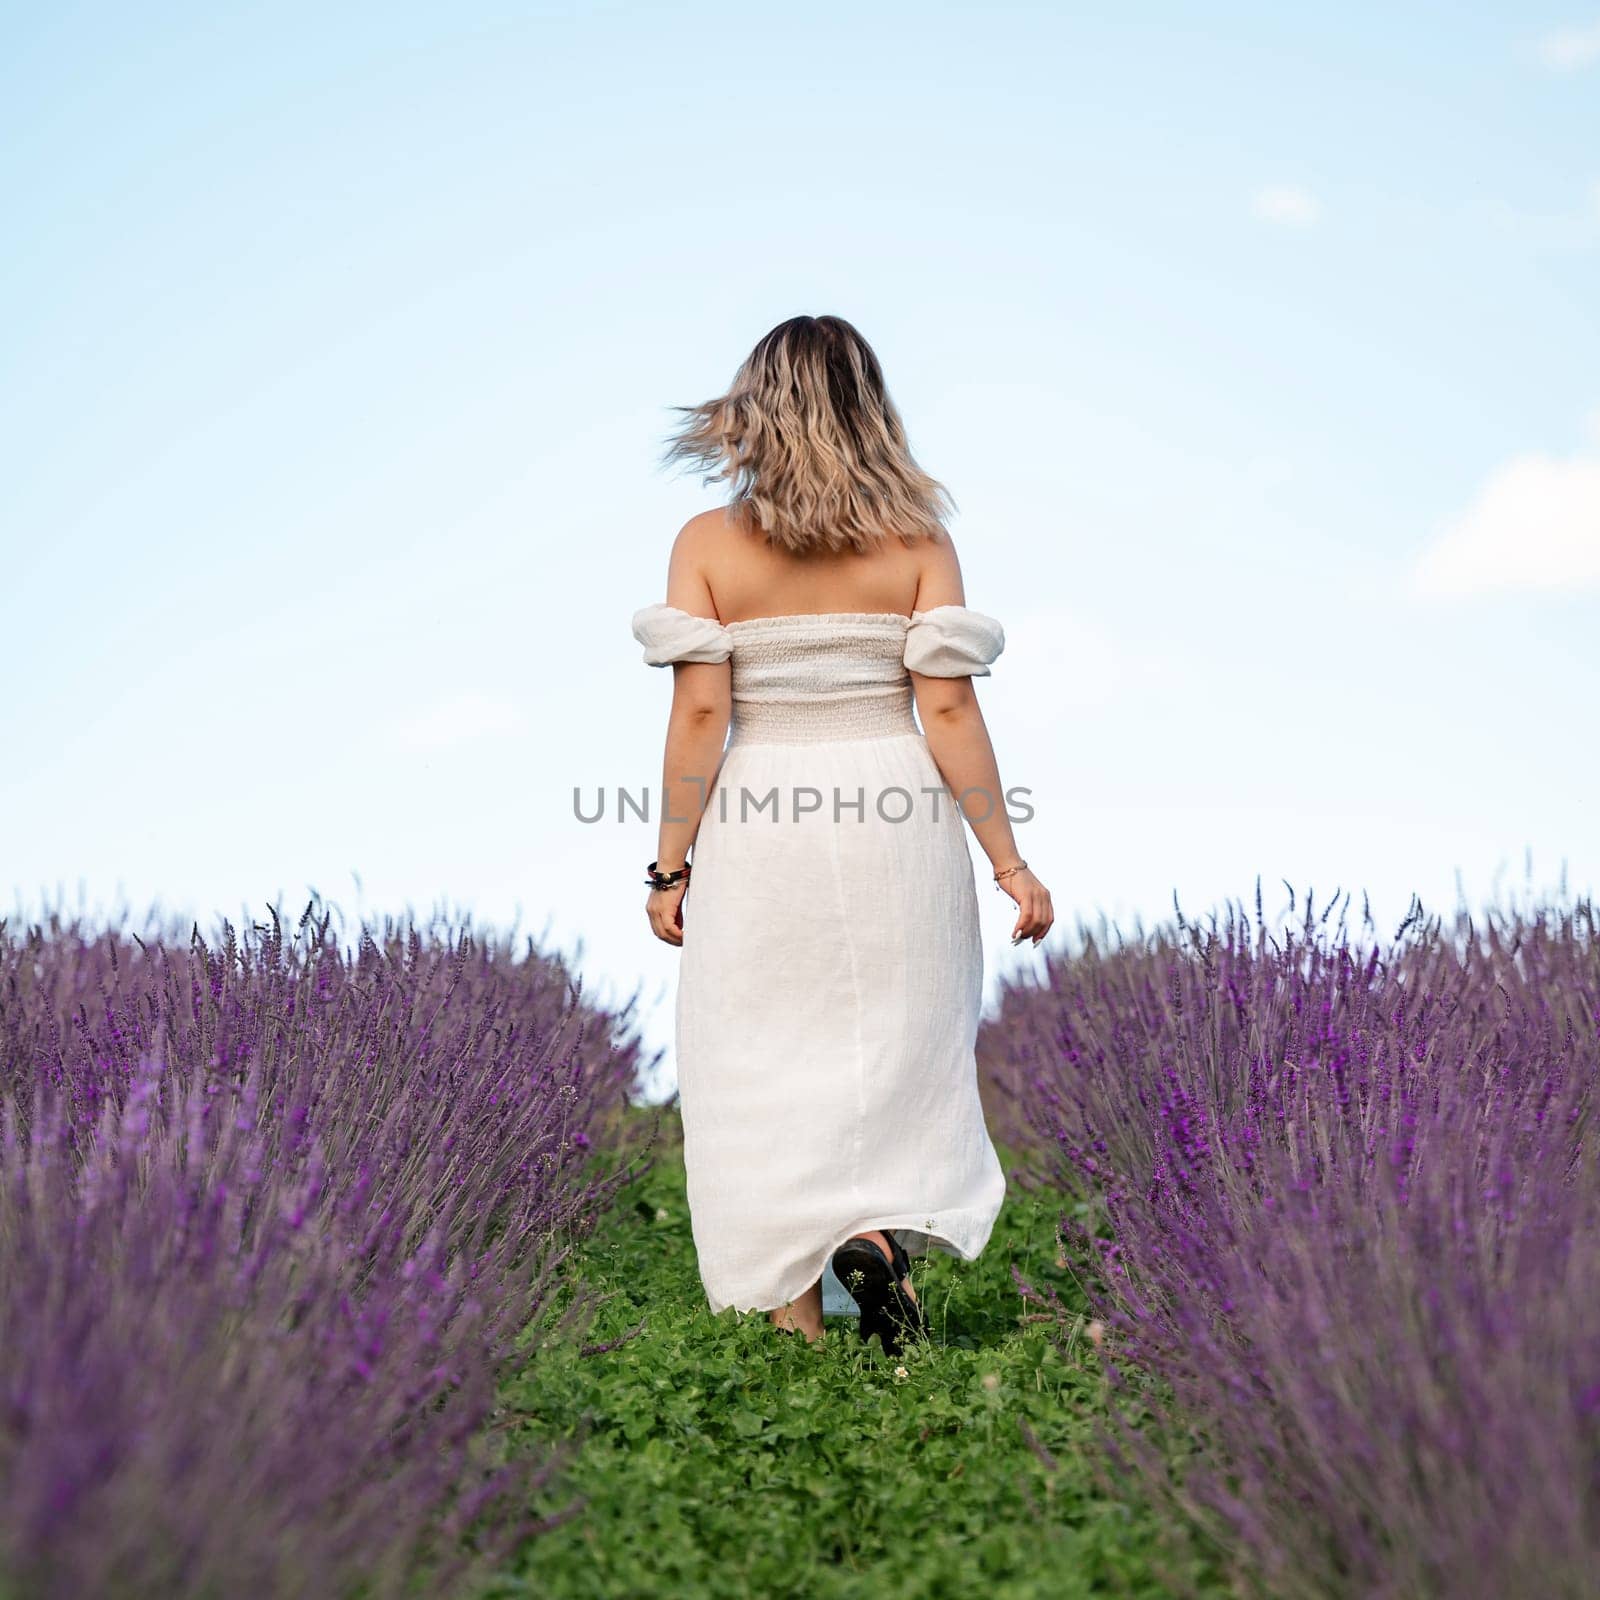 A beautiful girl walks in a white dress in a lavender field, aromatherapy in a lavender field.